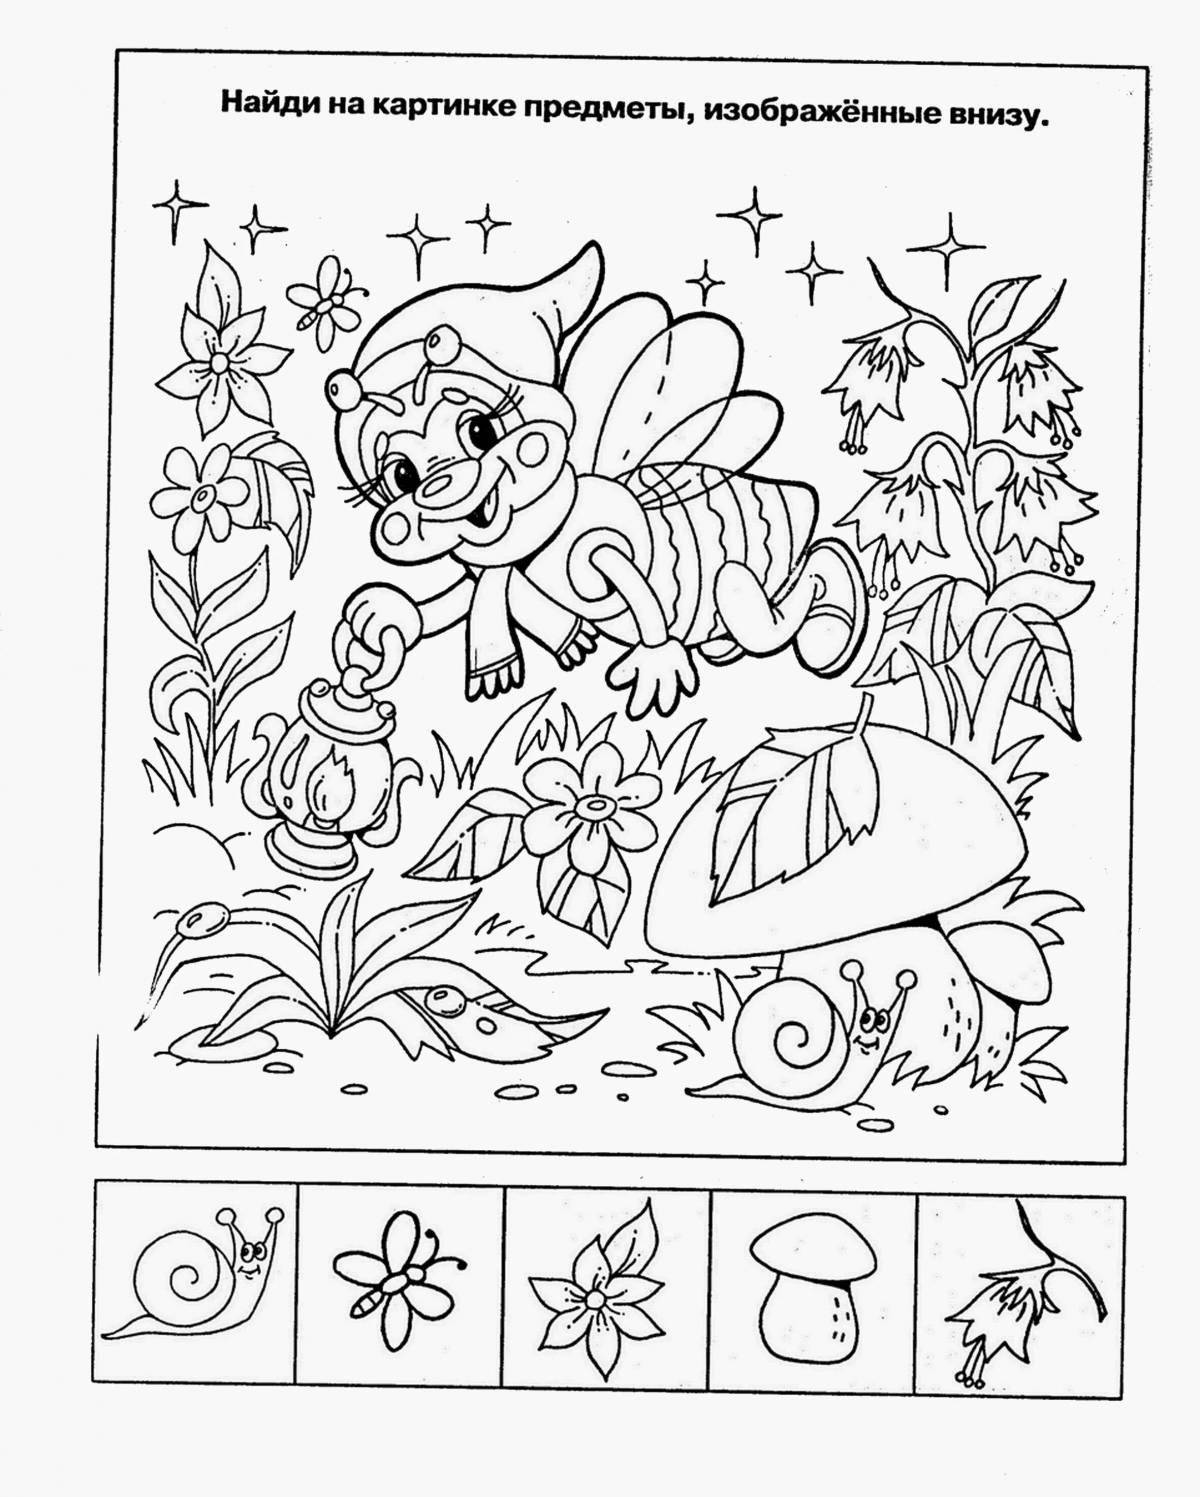 Dynamic coloring page 6 years of development